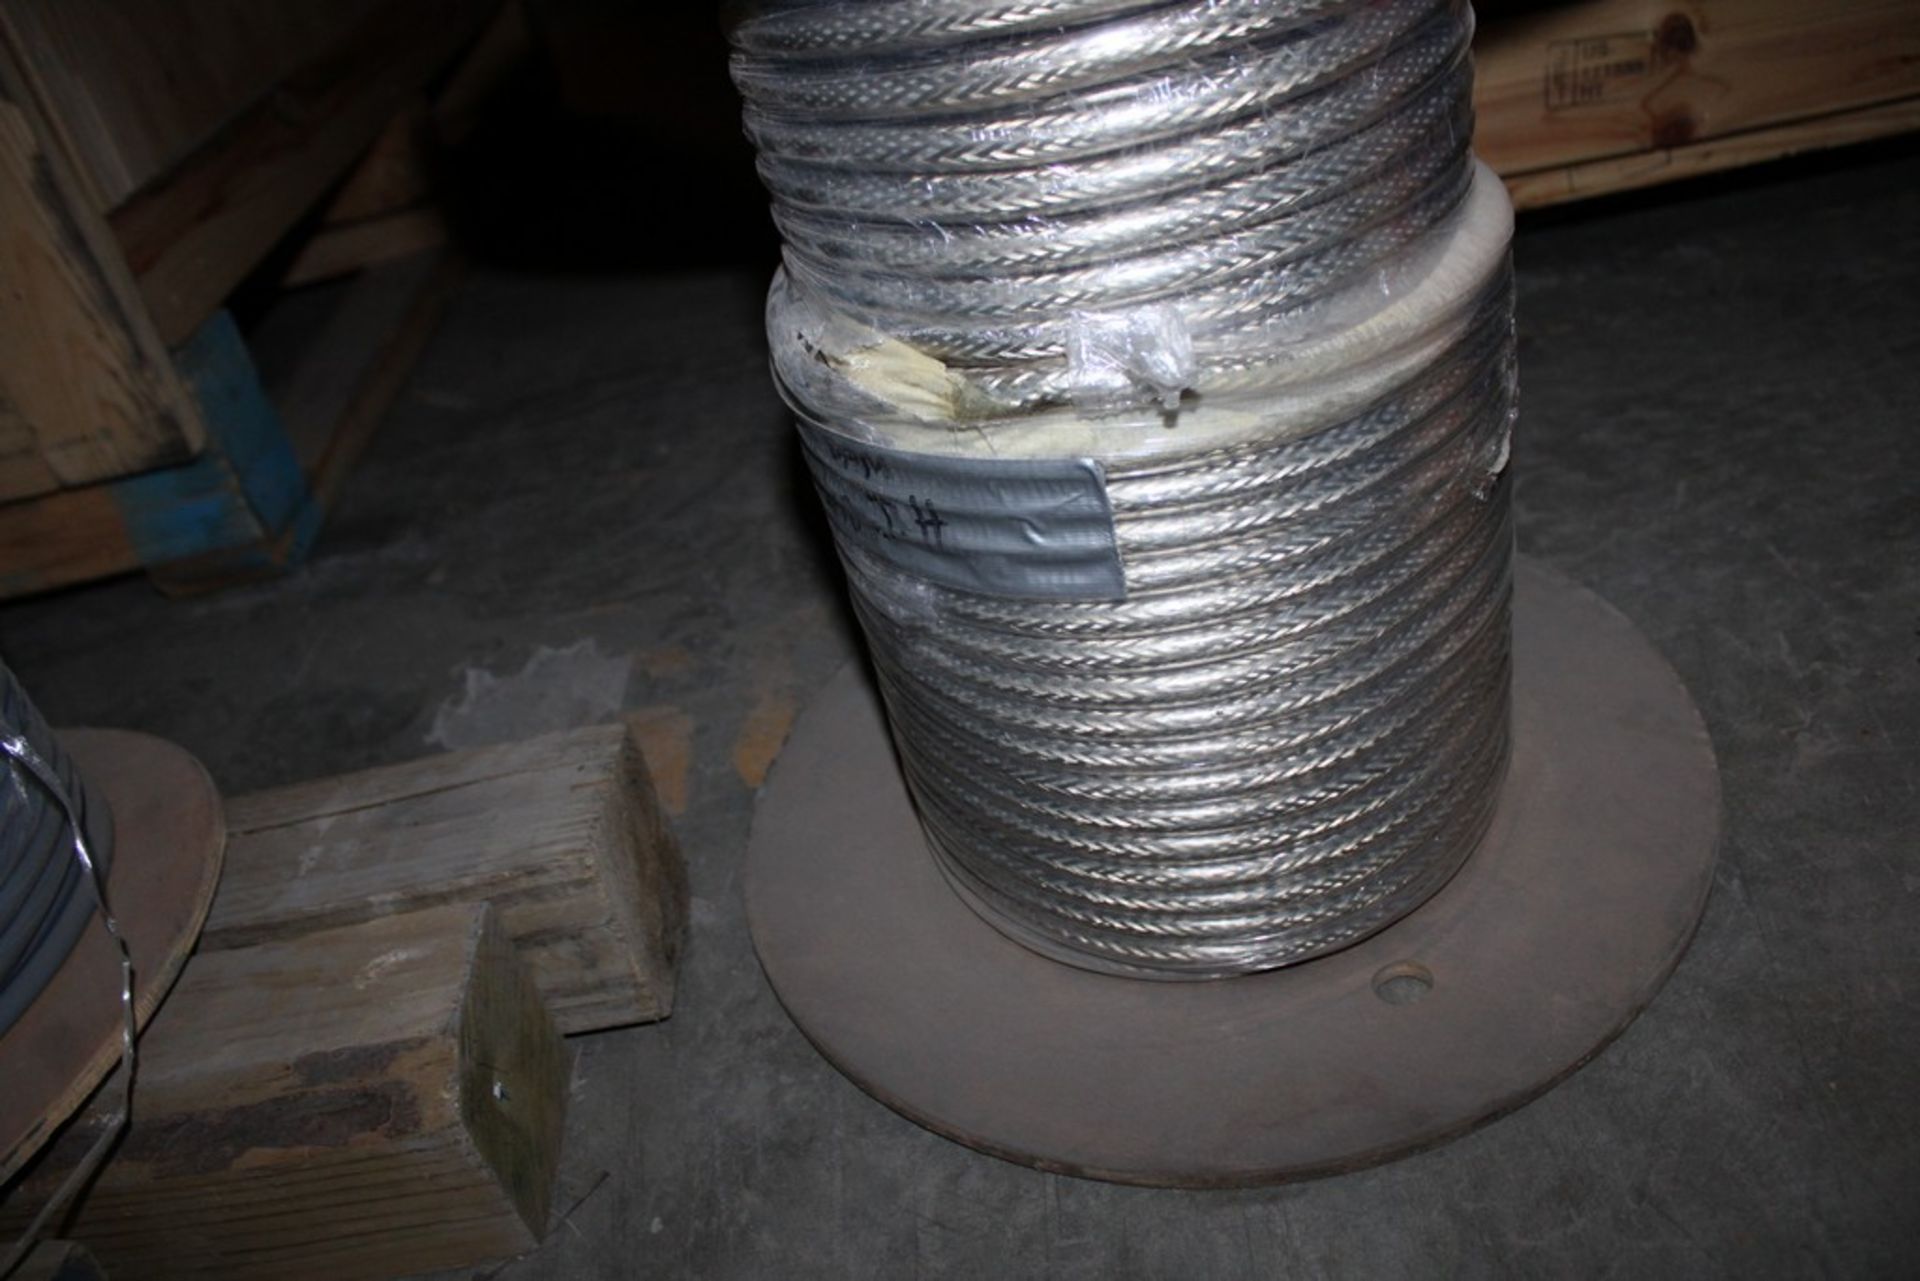 SPOOL OF LAPP KABEL FOUR STRAND WIRE - Image 2 of 2